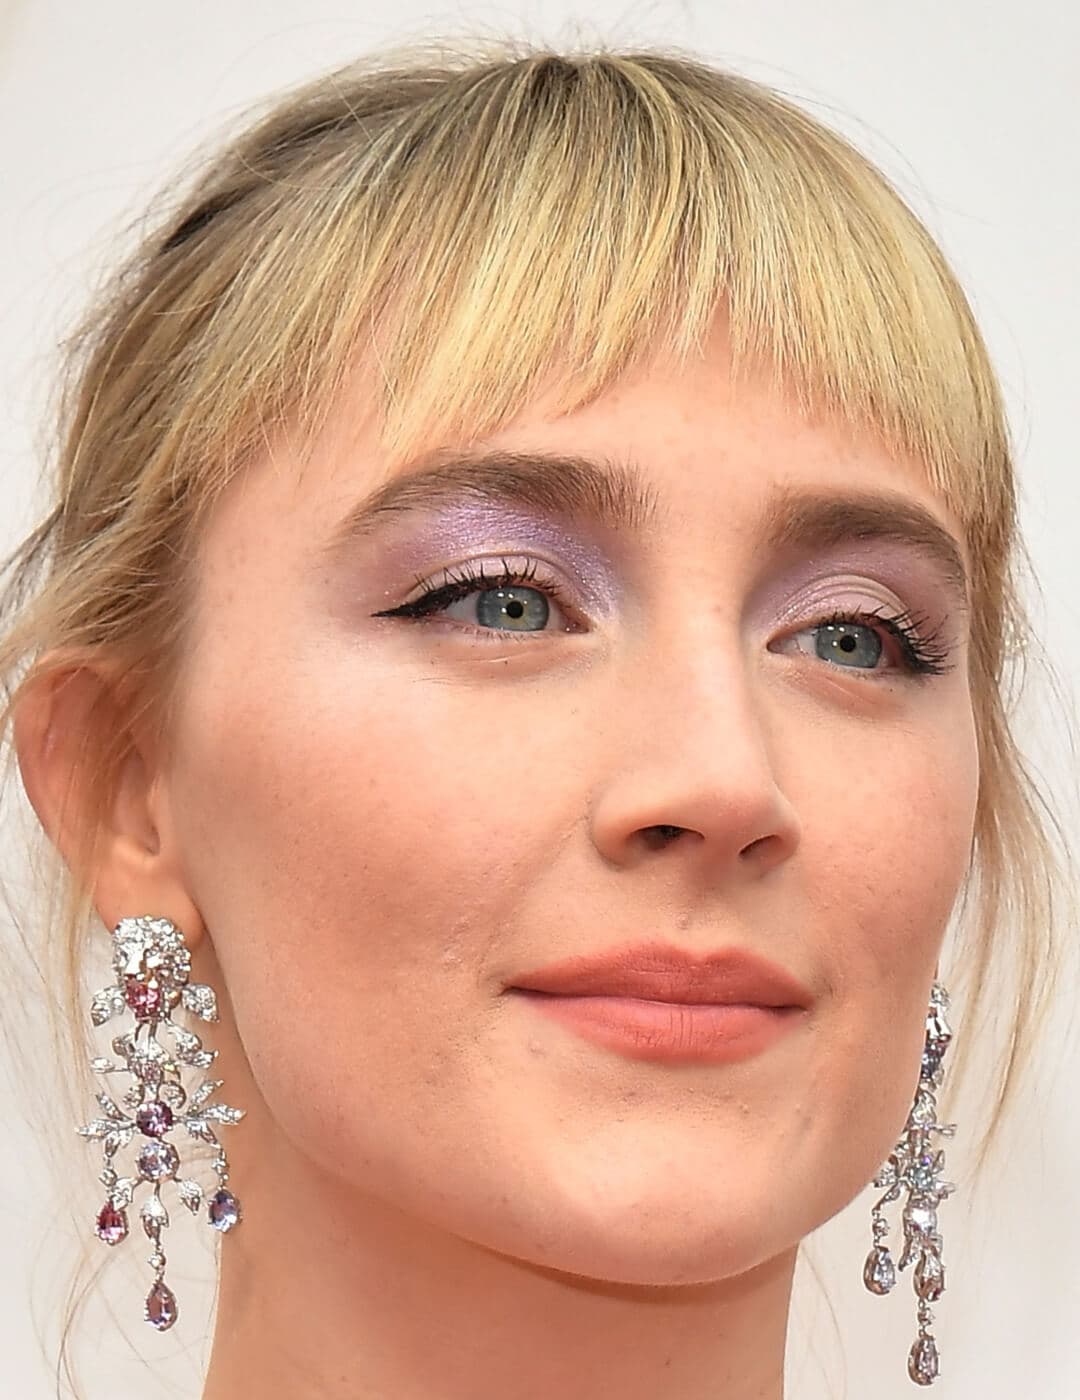 Saoirse Ronan rocking shimmery lavender eye makeup and silver dangling earrings on the red carpet